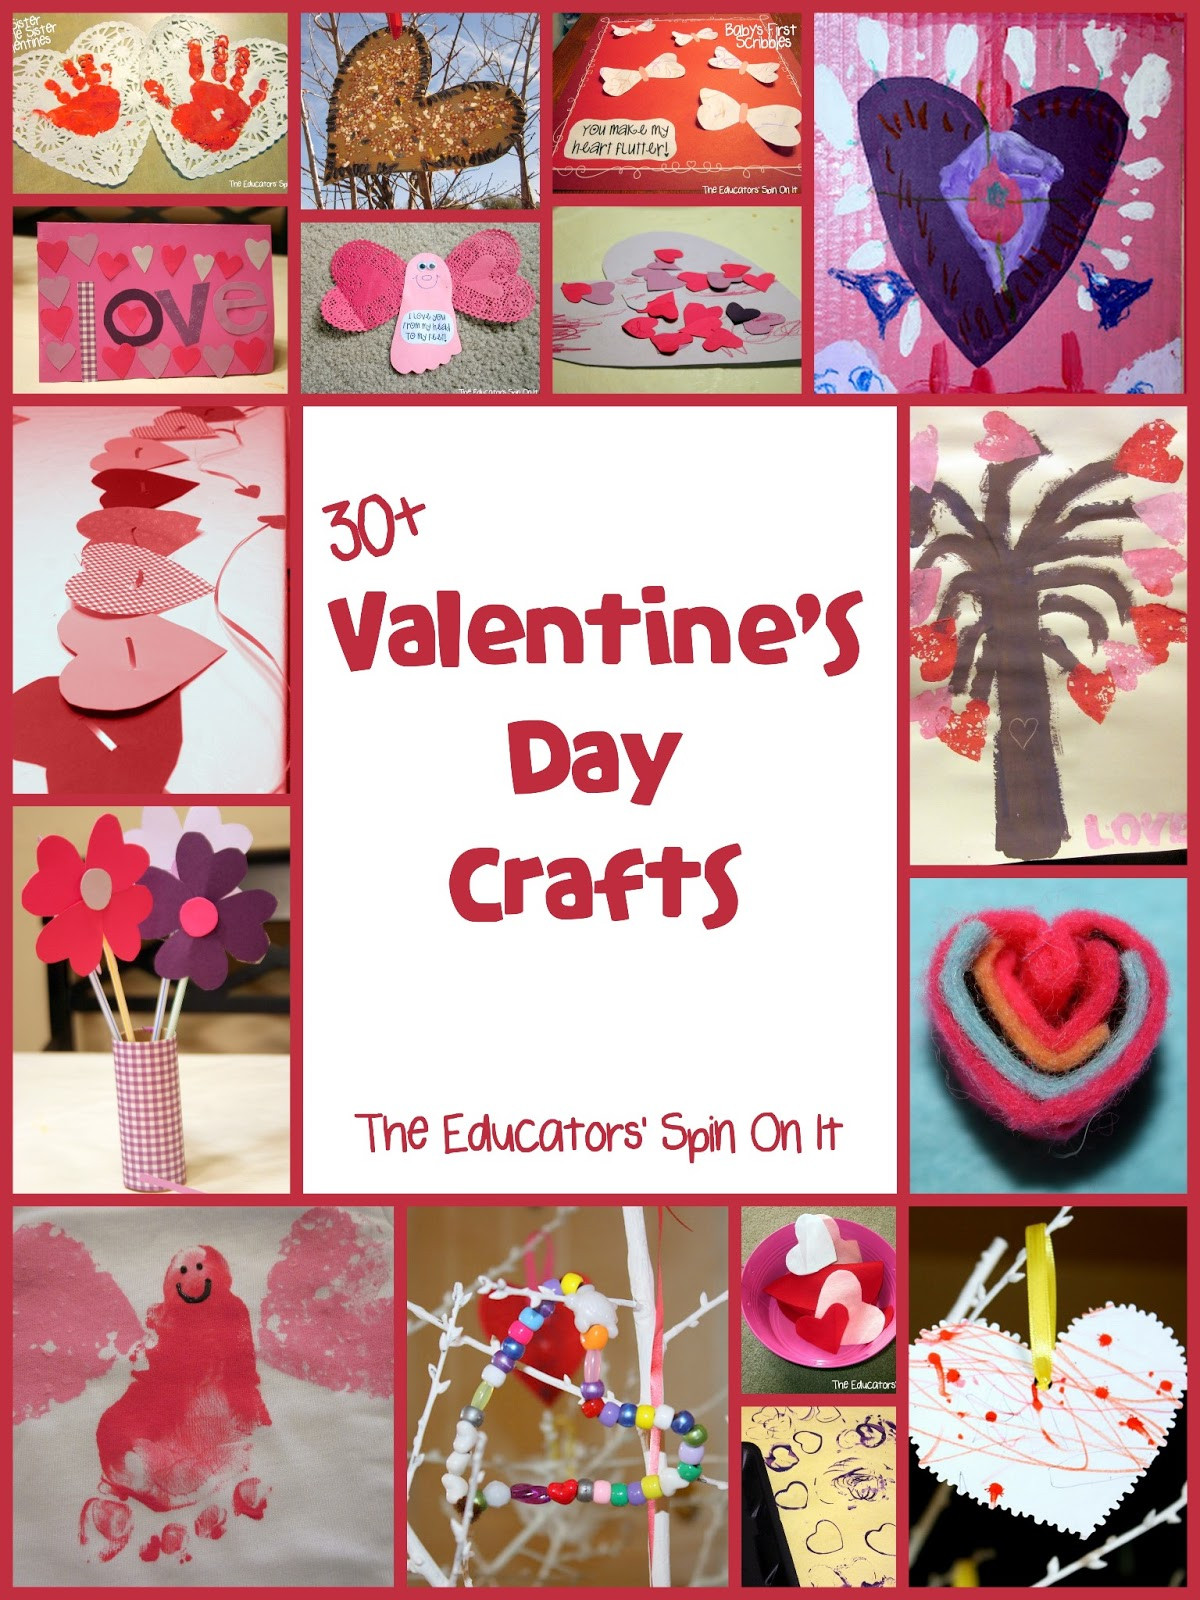 Valentines Day Activities for Kids Awesome 30 Valentine S Day Crafts and Activities for Kids the